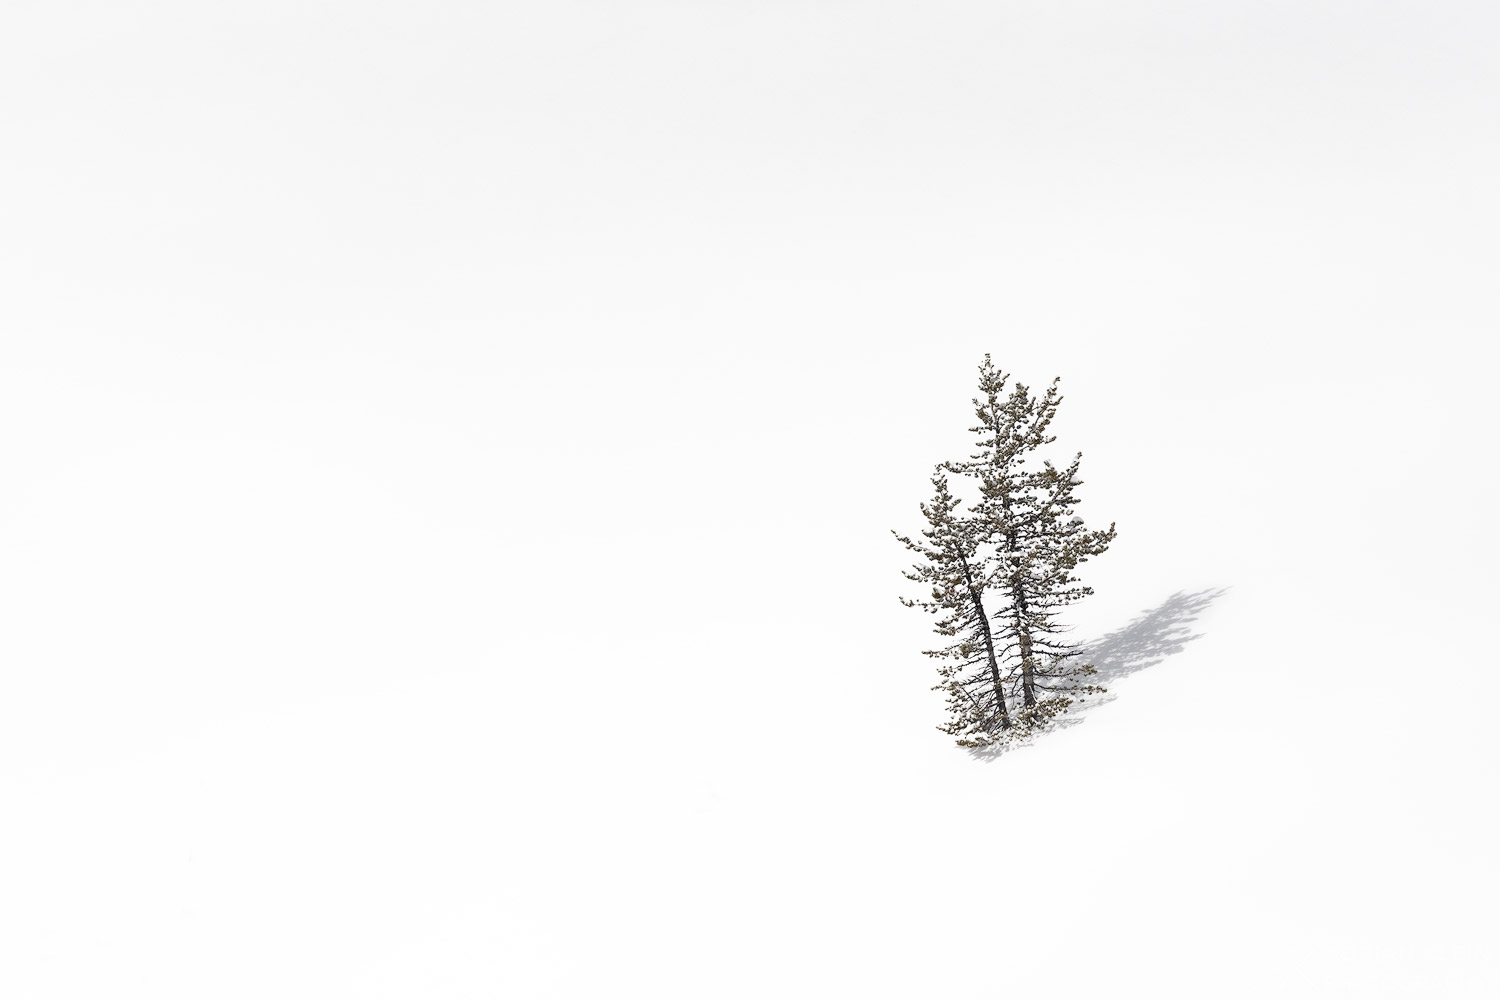 A couple young lone evergreen trees soaking up the winter sun after a fresh snowfall on Mount Hood